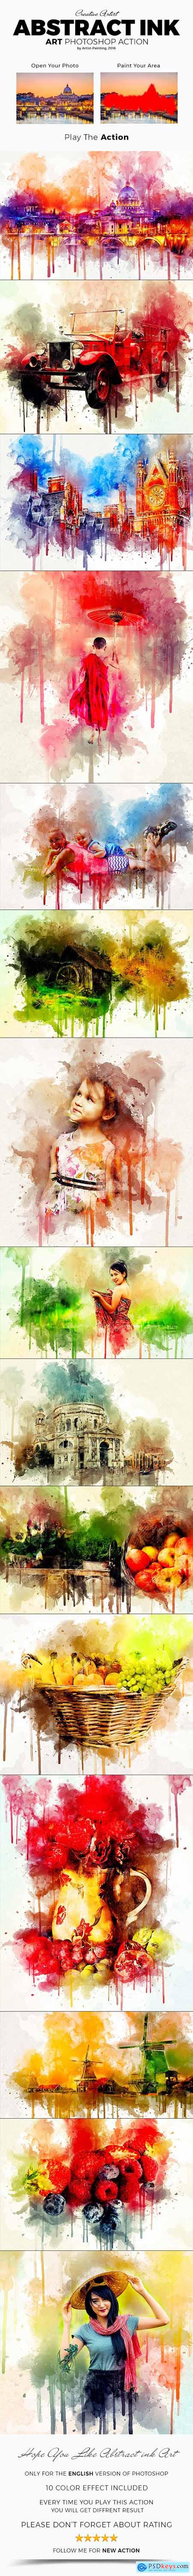 Abstract Ink Art Photoshop Action 21221110